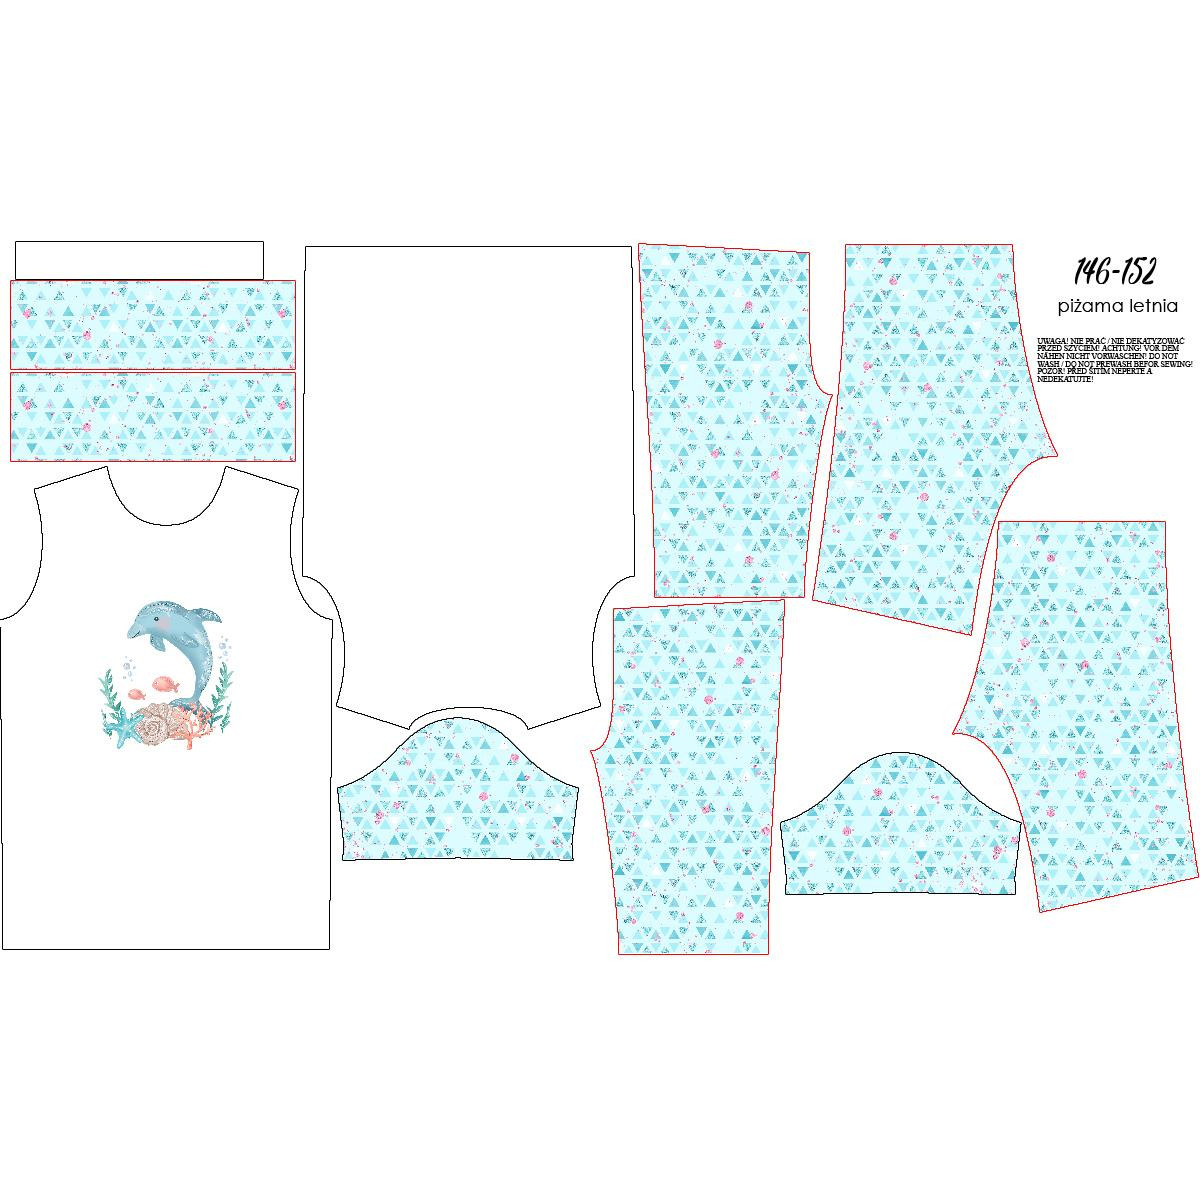 CHILDREN'S PAJAMAS "ADA" - DOLPHIN / triangles - sewing set